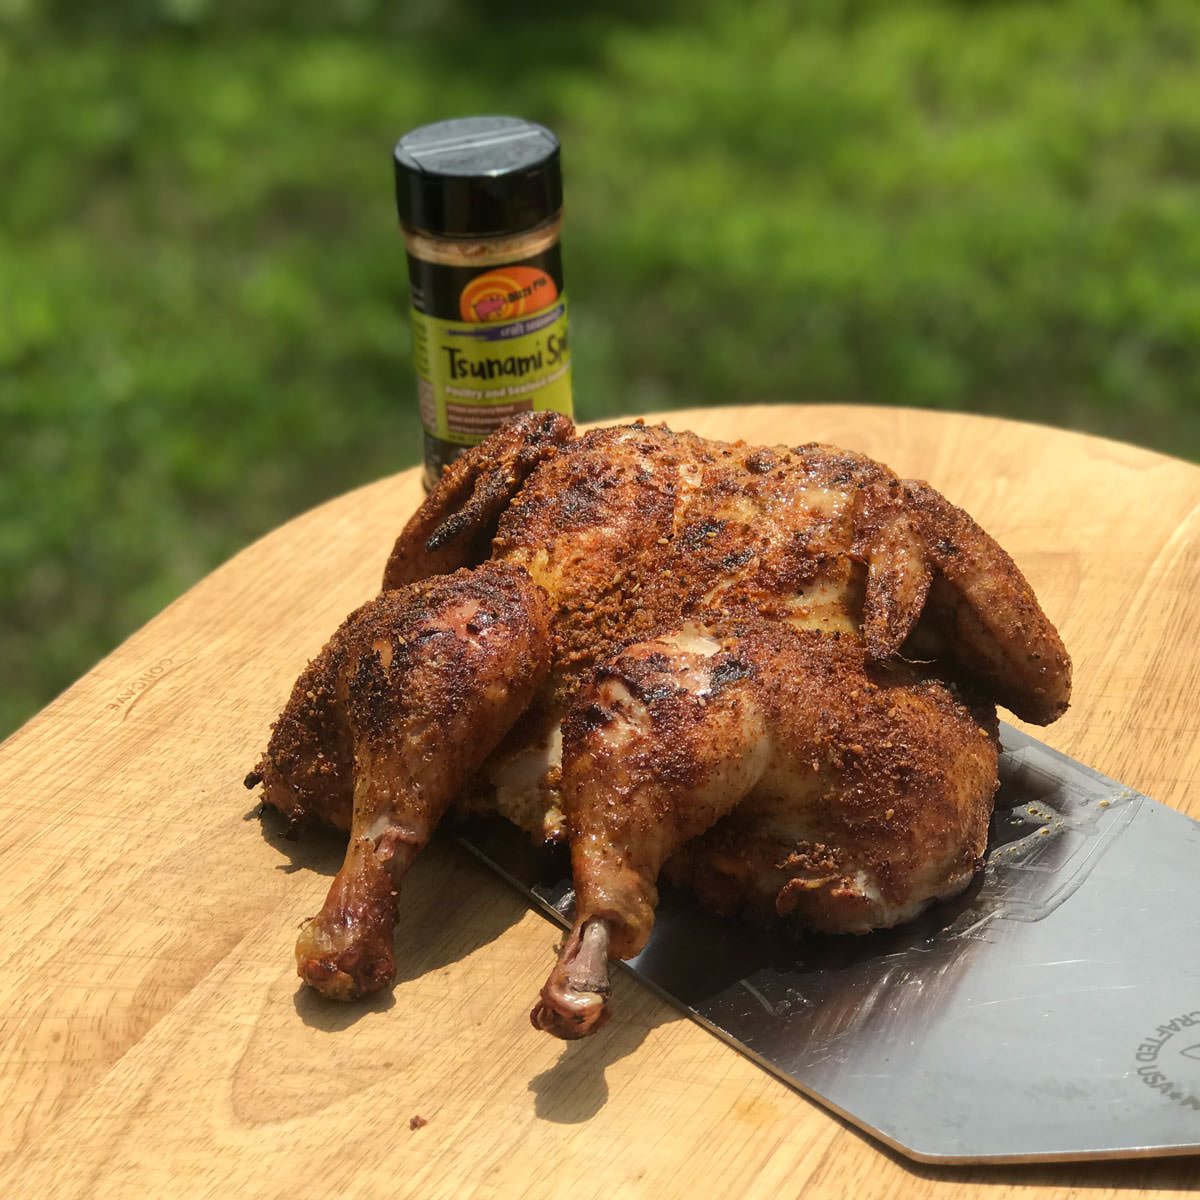 Our 5.5 lbs bird took 1:30 to cook